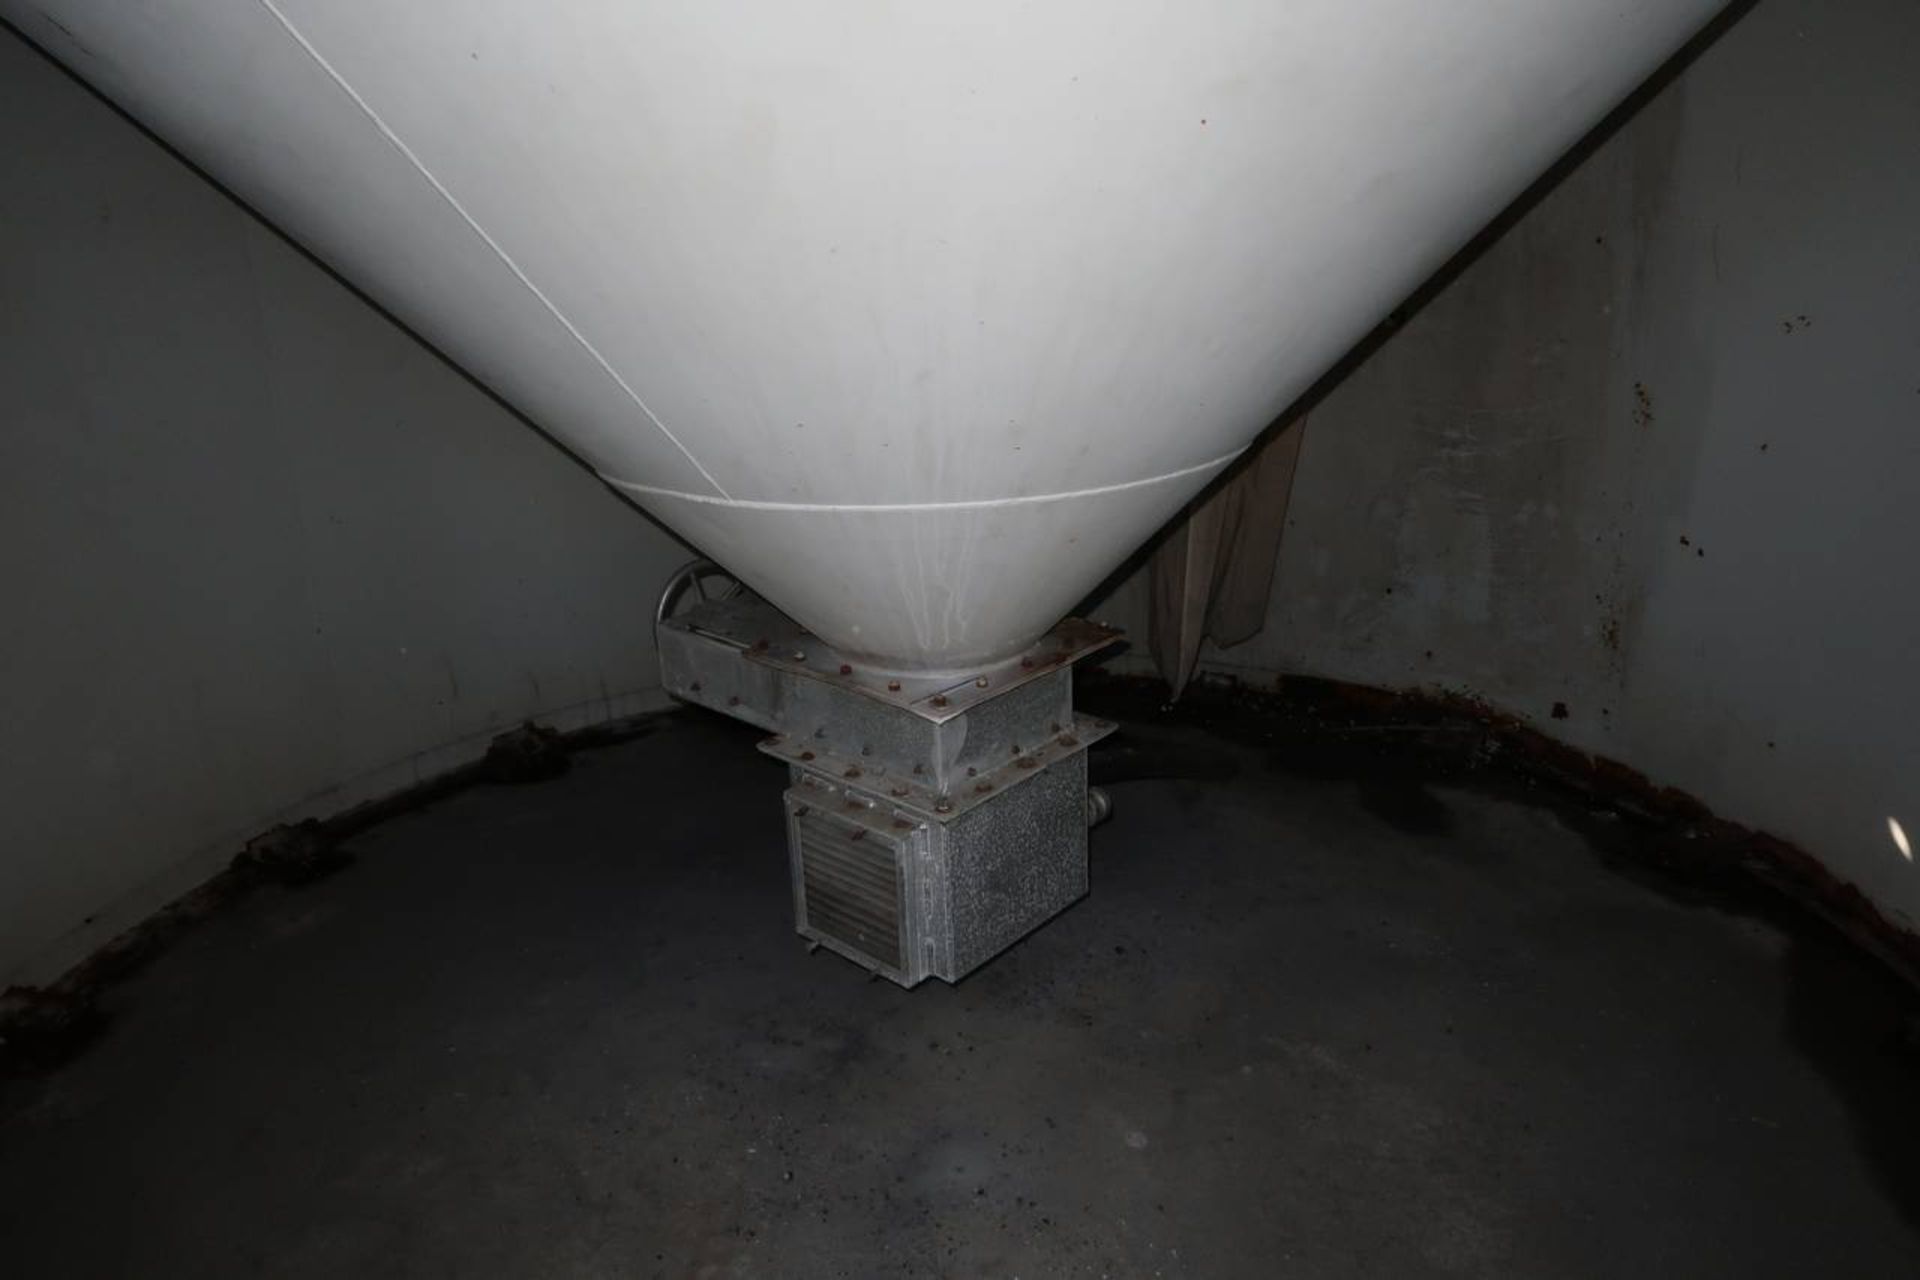 West Material Silo - Image 4 of 4